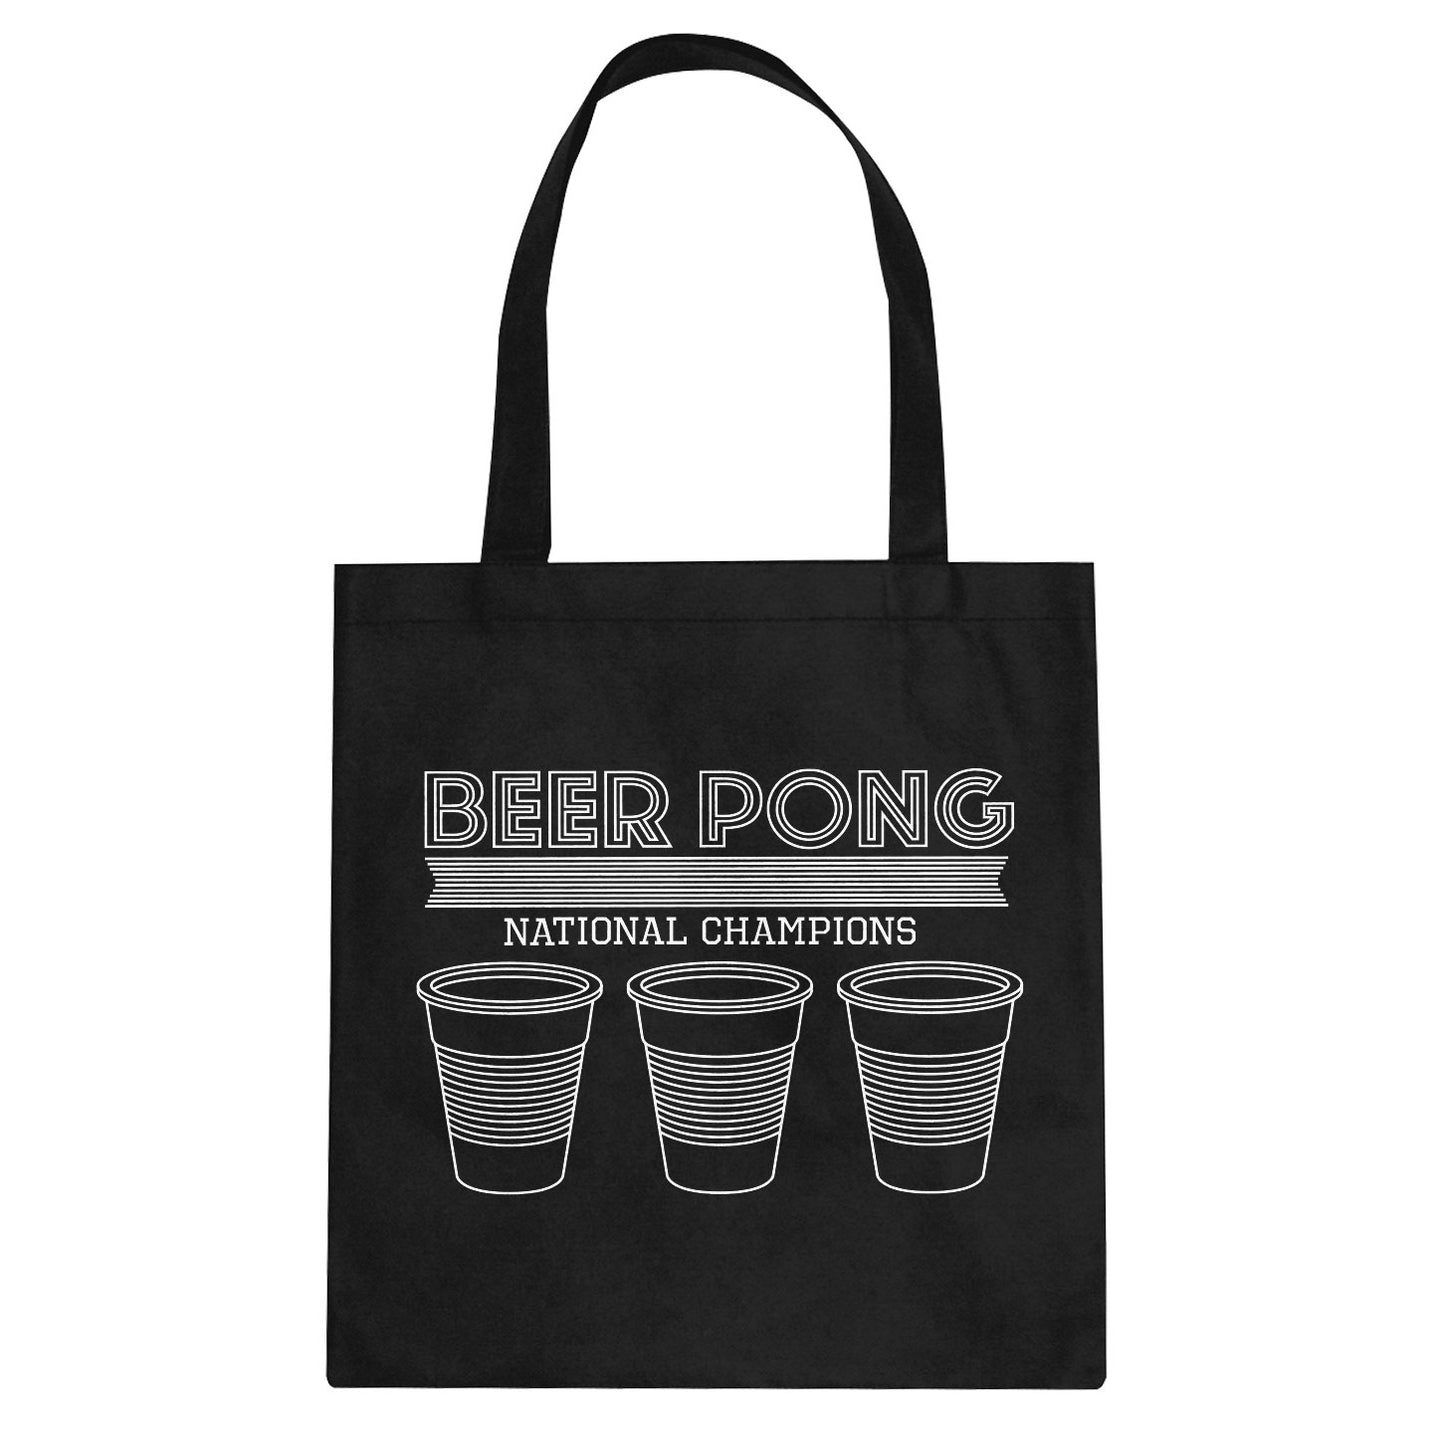 Tote Beer Pong National Champions Canvas Tote Bag